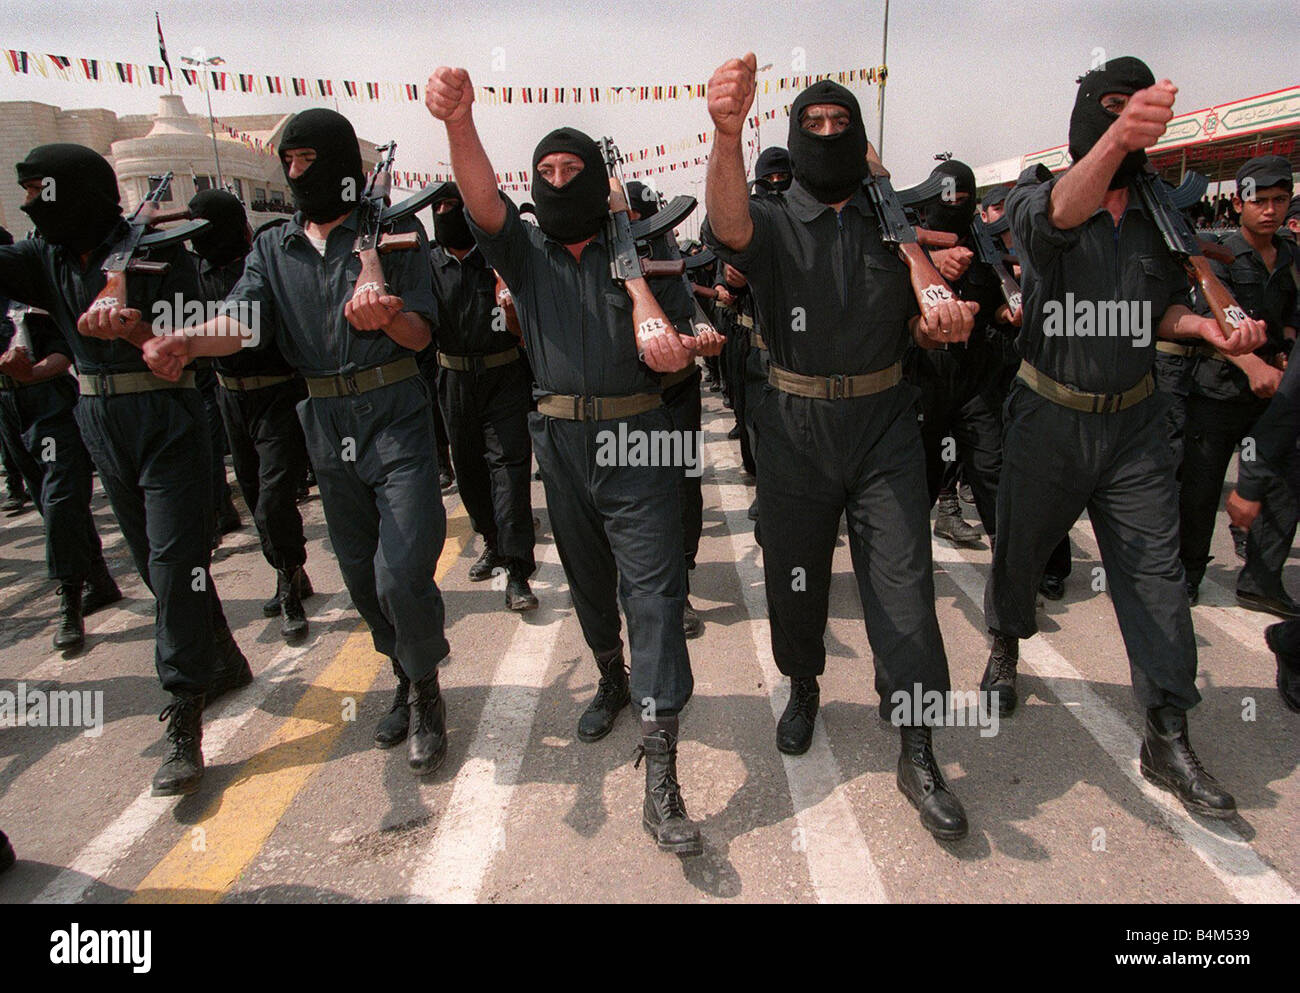 Volunteer Reserve Army May 1998 Parade in Tikrit the birthplace of Saddam Hussein Our Picture Shows Men of the Suicide Commandos wearing in black masks Stock Photo